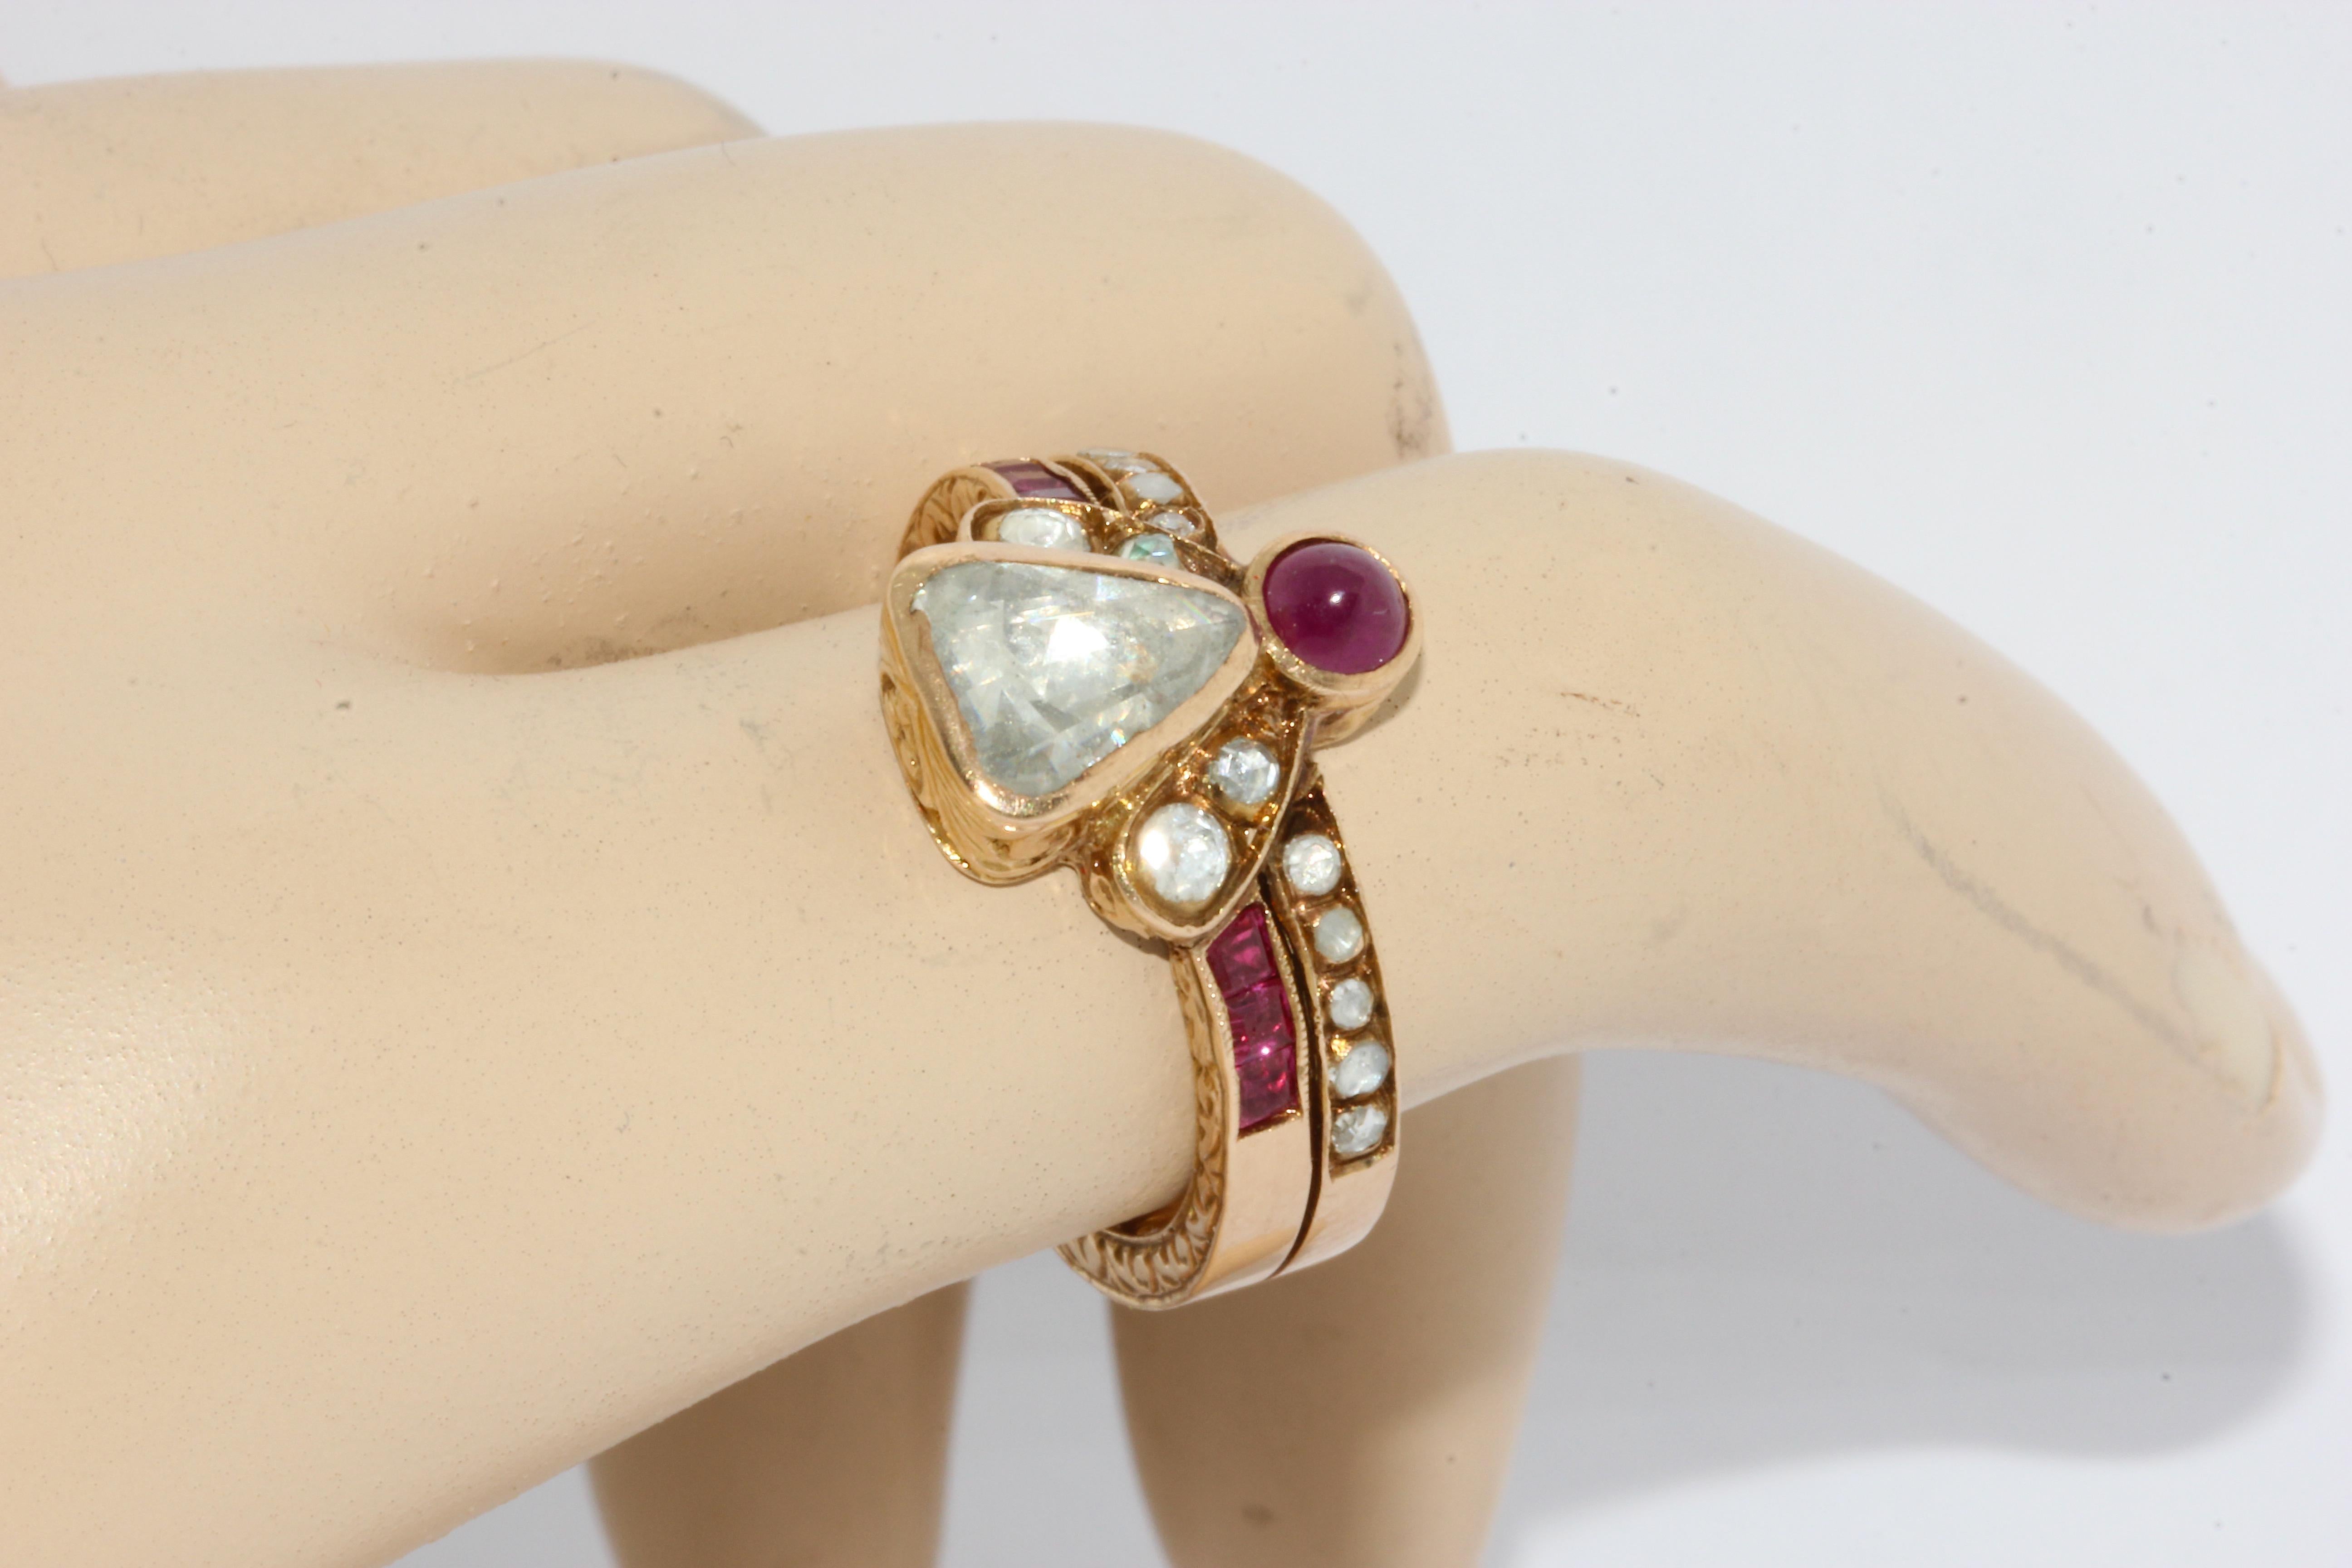 Antique, Royal Gold Ring with Rose Cut Trillion Diamond, Rubies and Ornaments In Good Condition For Sale In Berlin, DE